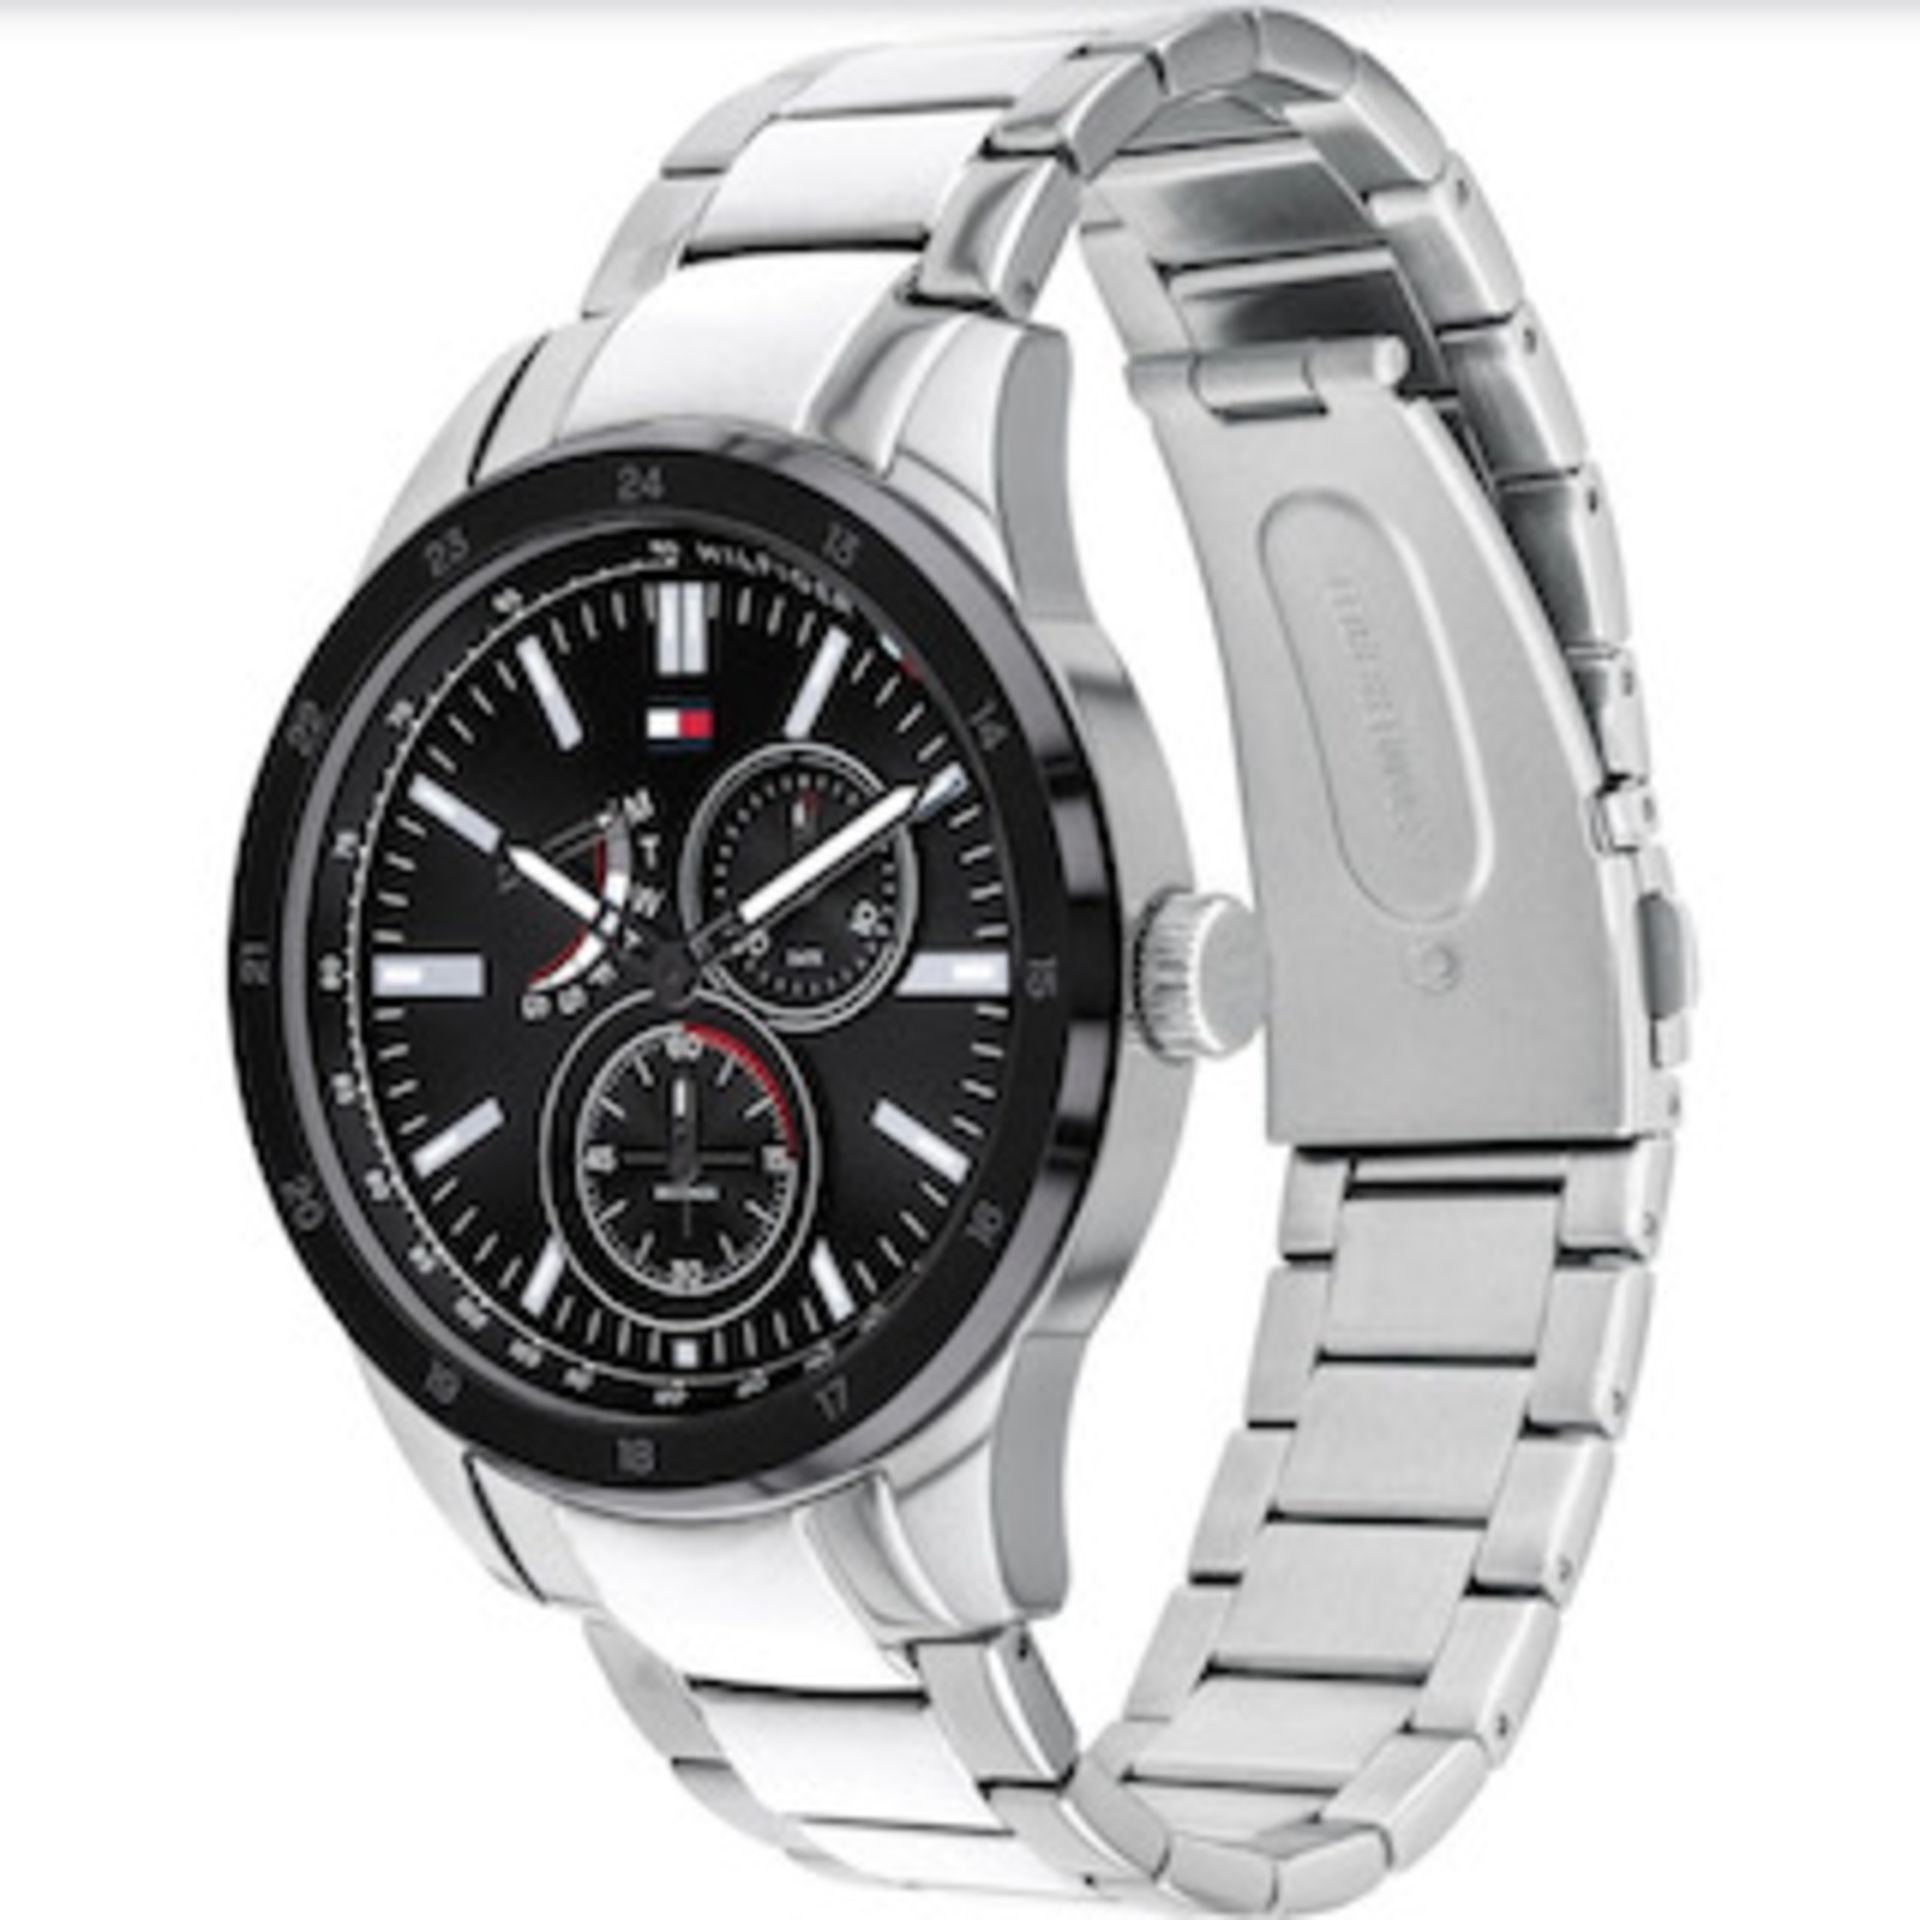 Tommy Hilfiger 1791639 Men's Black And Silver Stainless Steel Bracelet Watch - Image 3 of 7